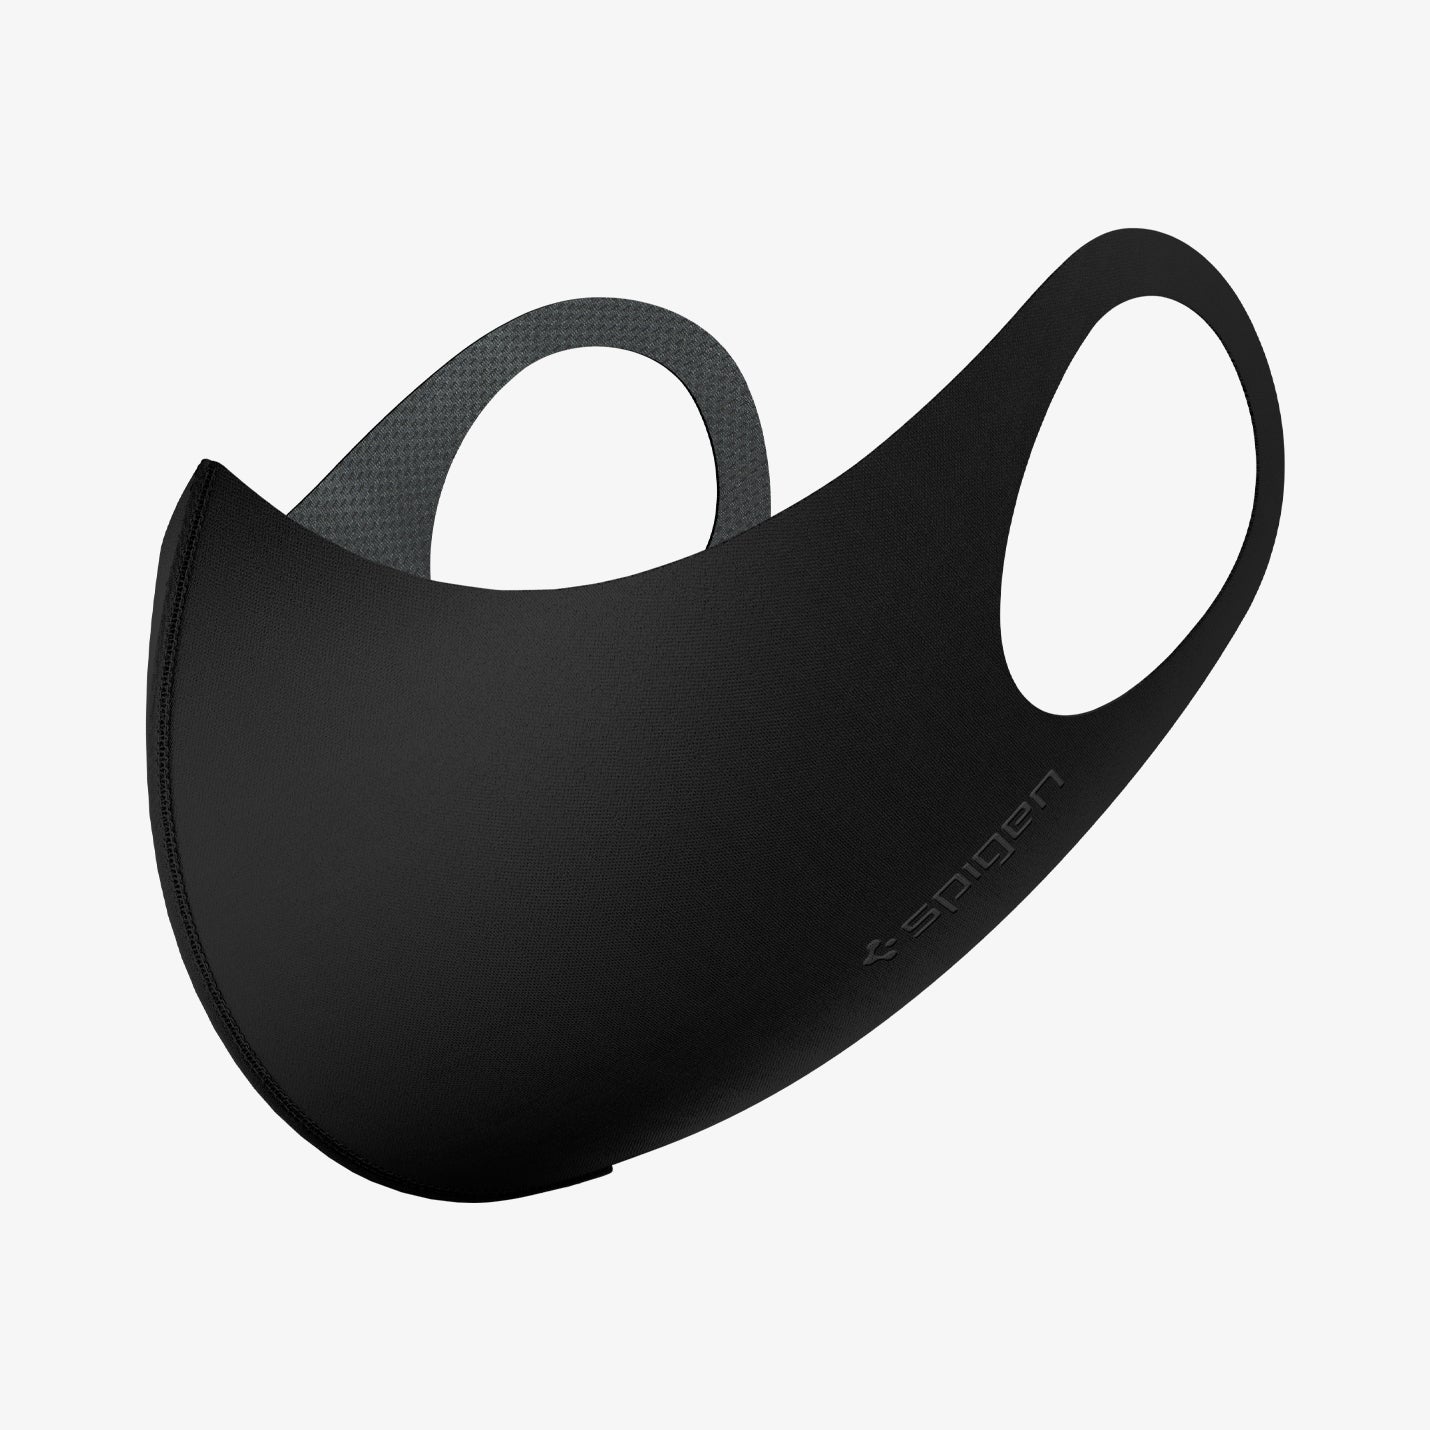 AHP01876 - Air Mask in black showing the front and side